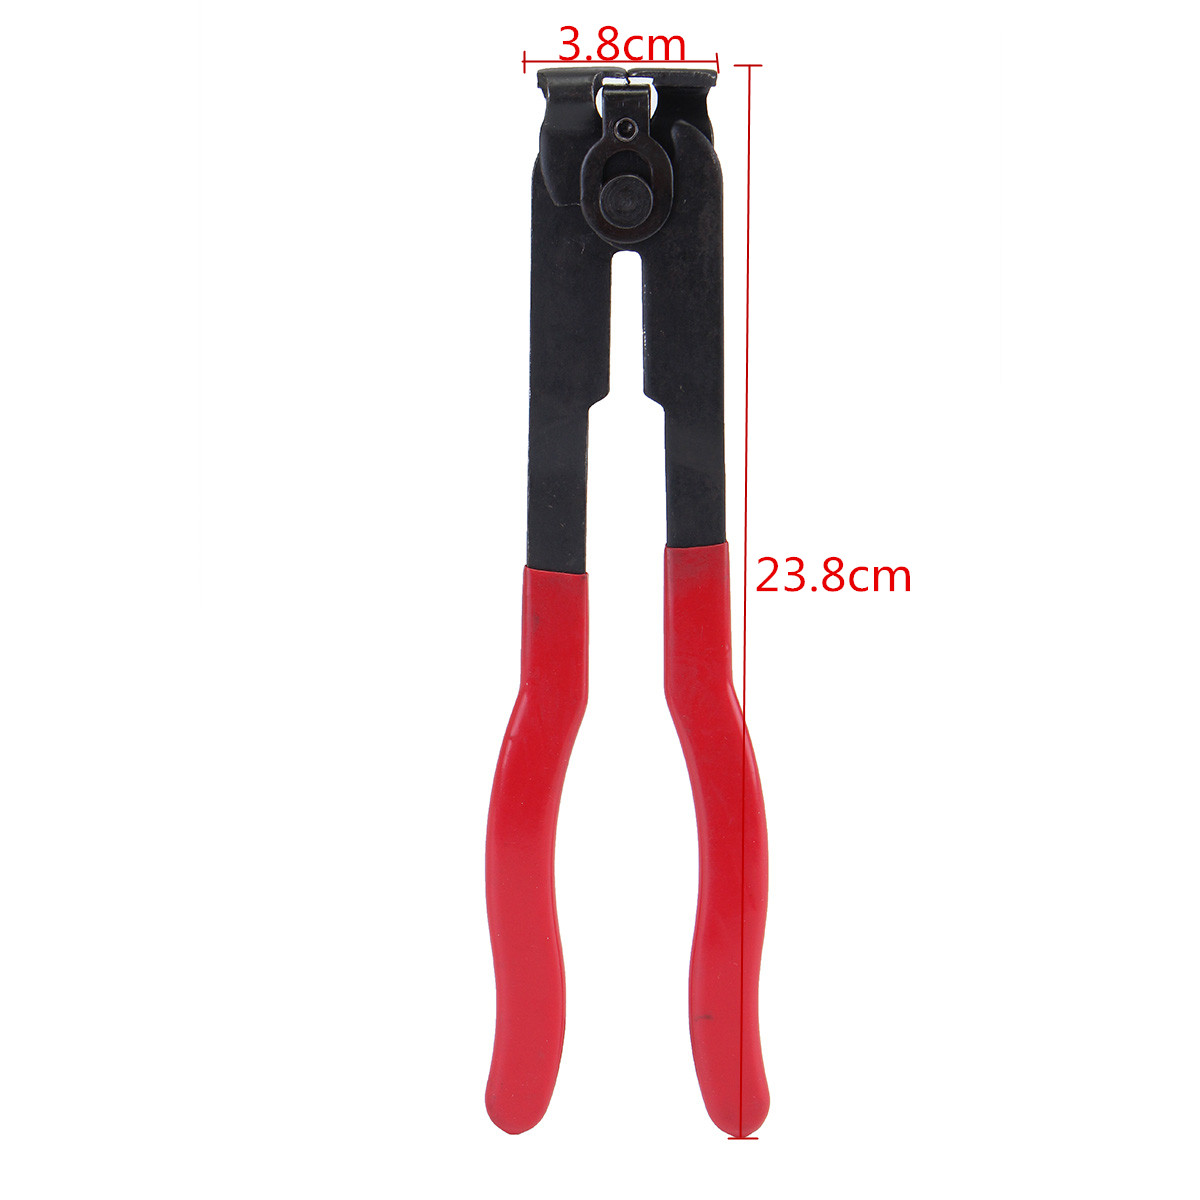 Ear-Type-CV-Joint-Boot-Clamp-Plier-Installer-Tool-For-Fuel-amp-Coolant-Hose-Pipe-1146284